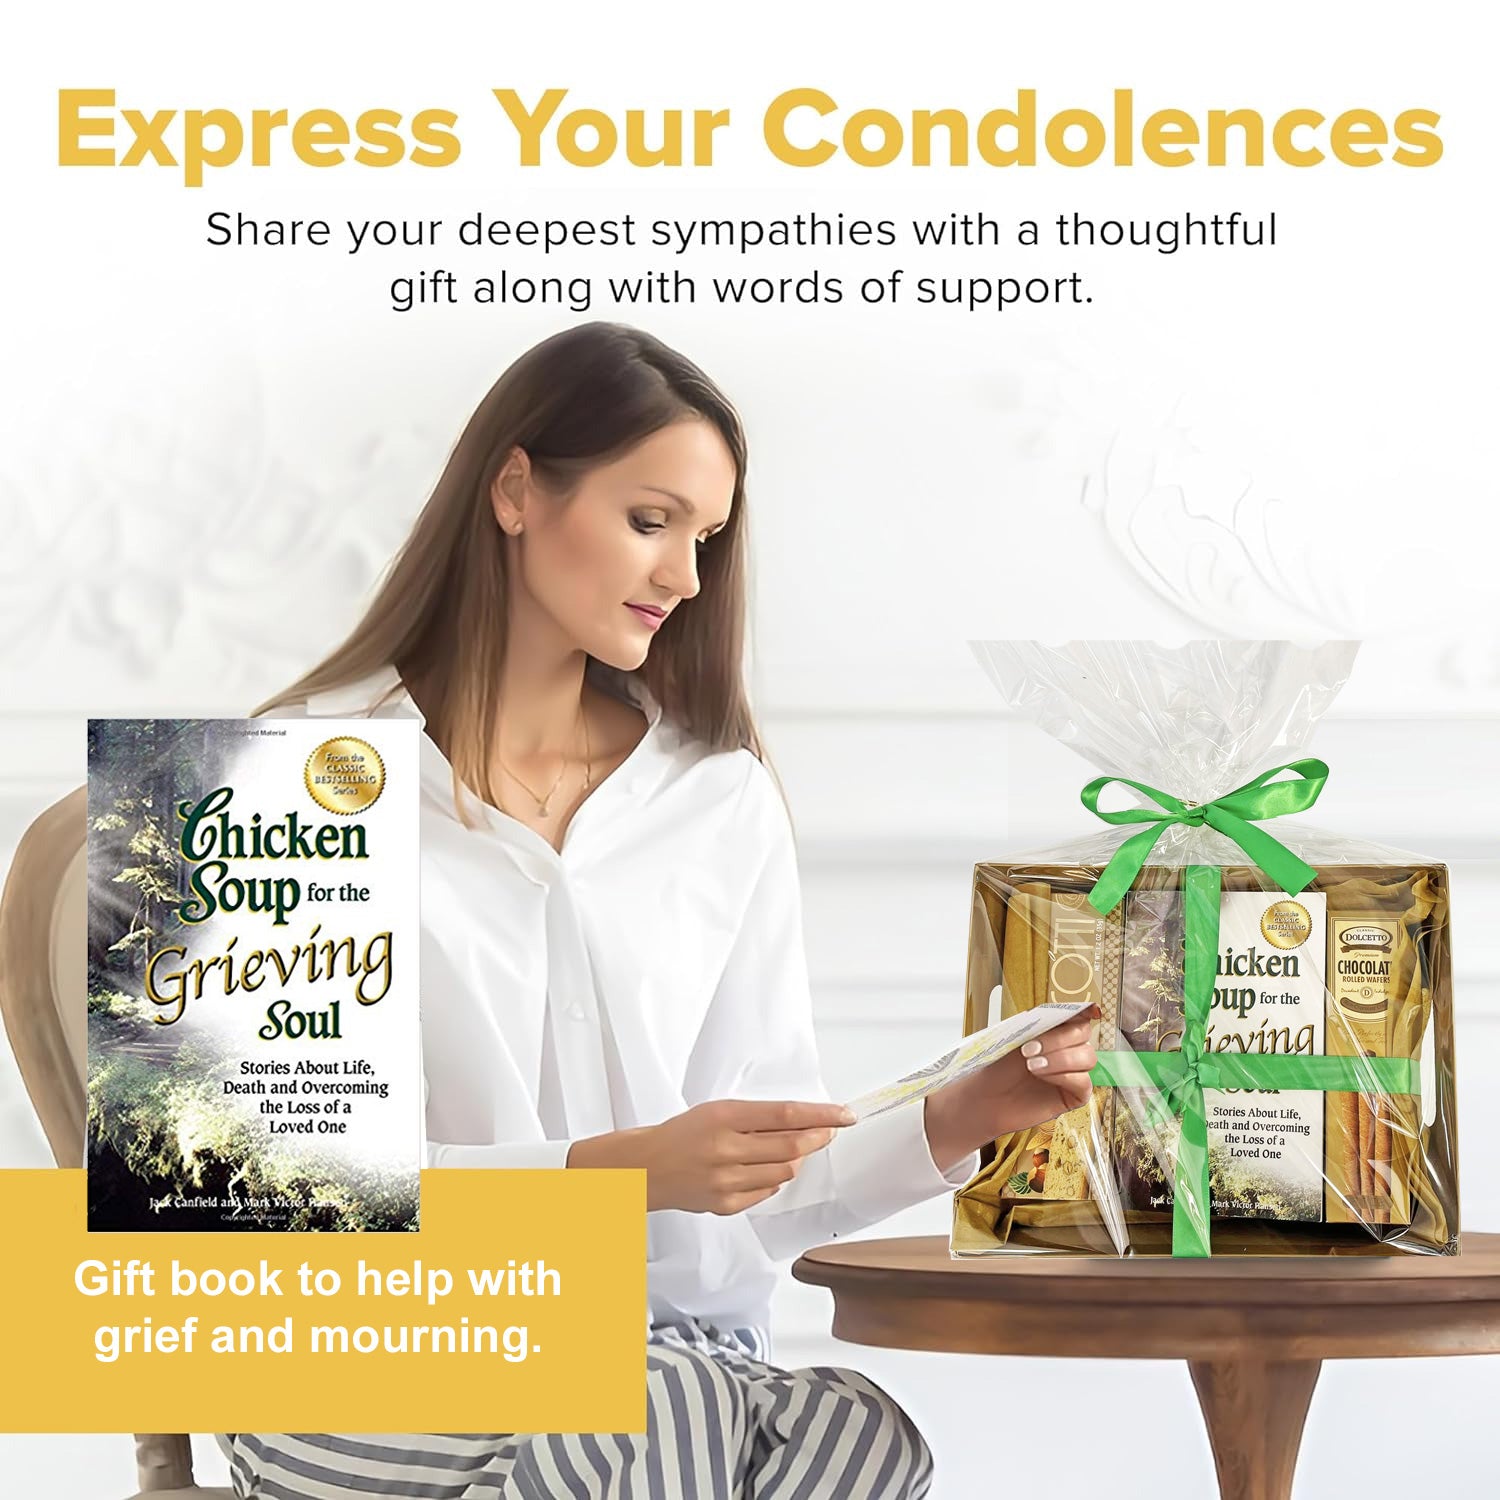 Consoling Sympathy Gift Basket for the Grieving Soul with Book and Gourmet Food to Send Condolences